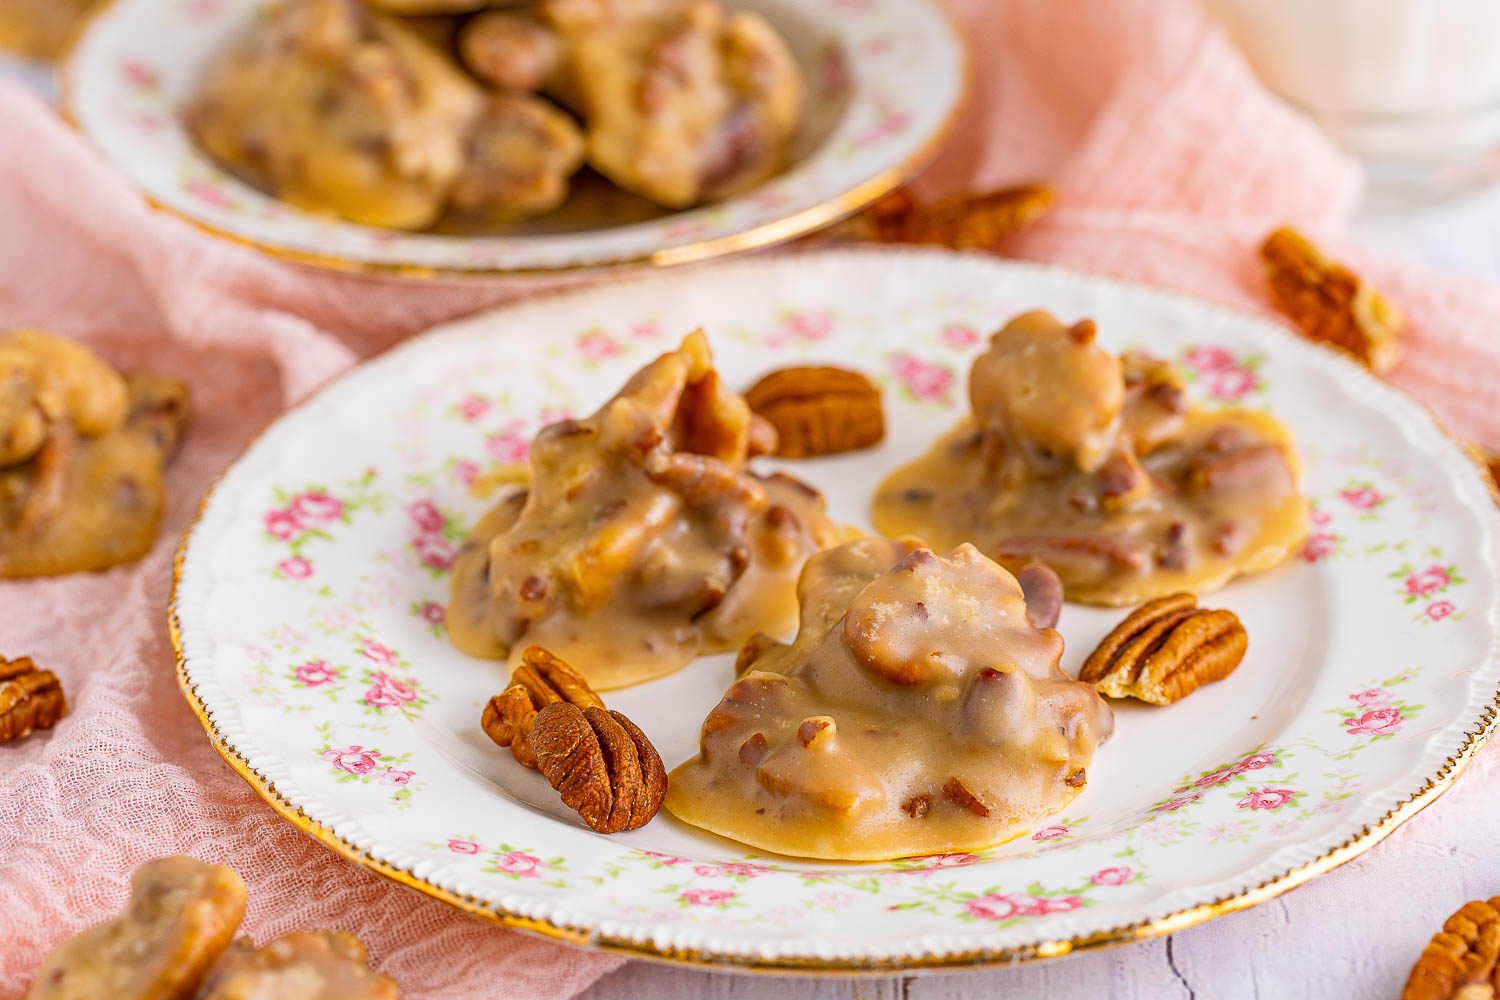 Southern Pecan Praline Recipe is deliciously creamy and crunchy candy made with butter, sugar, cream, and pecans. It's the perfect candy to make all year long.